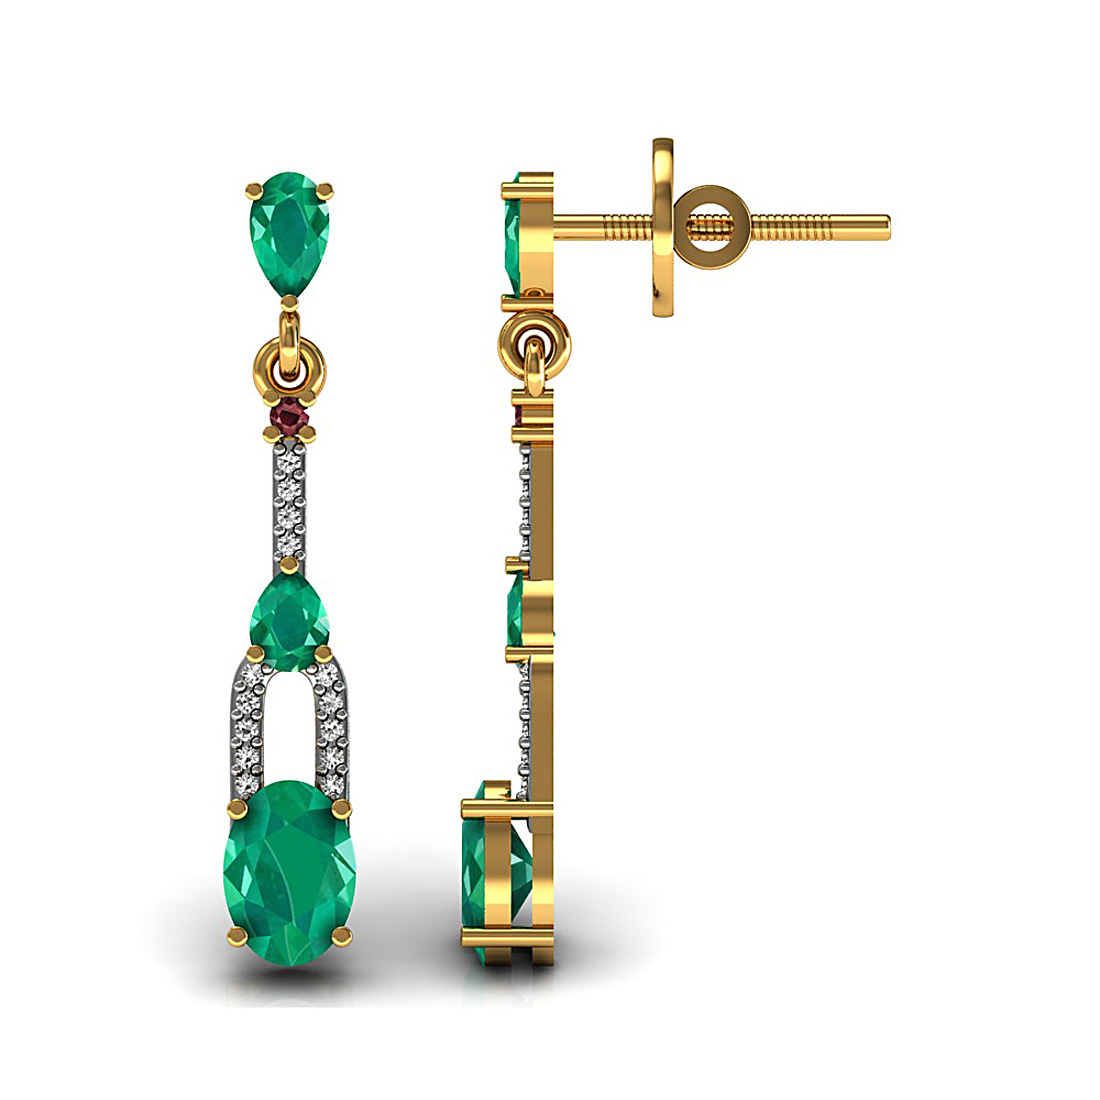 Dangle drop earrings made in 18k solid yellow gold studded with real diamond and natural emerald ruby gemstone.